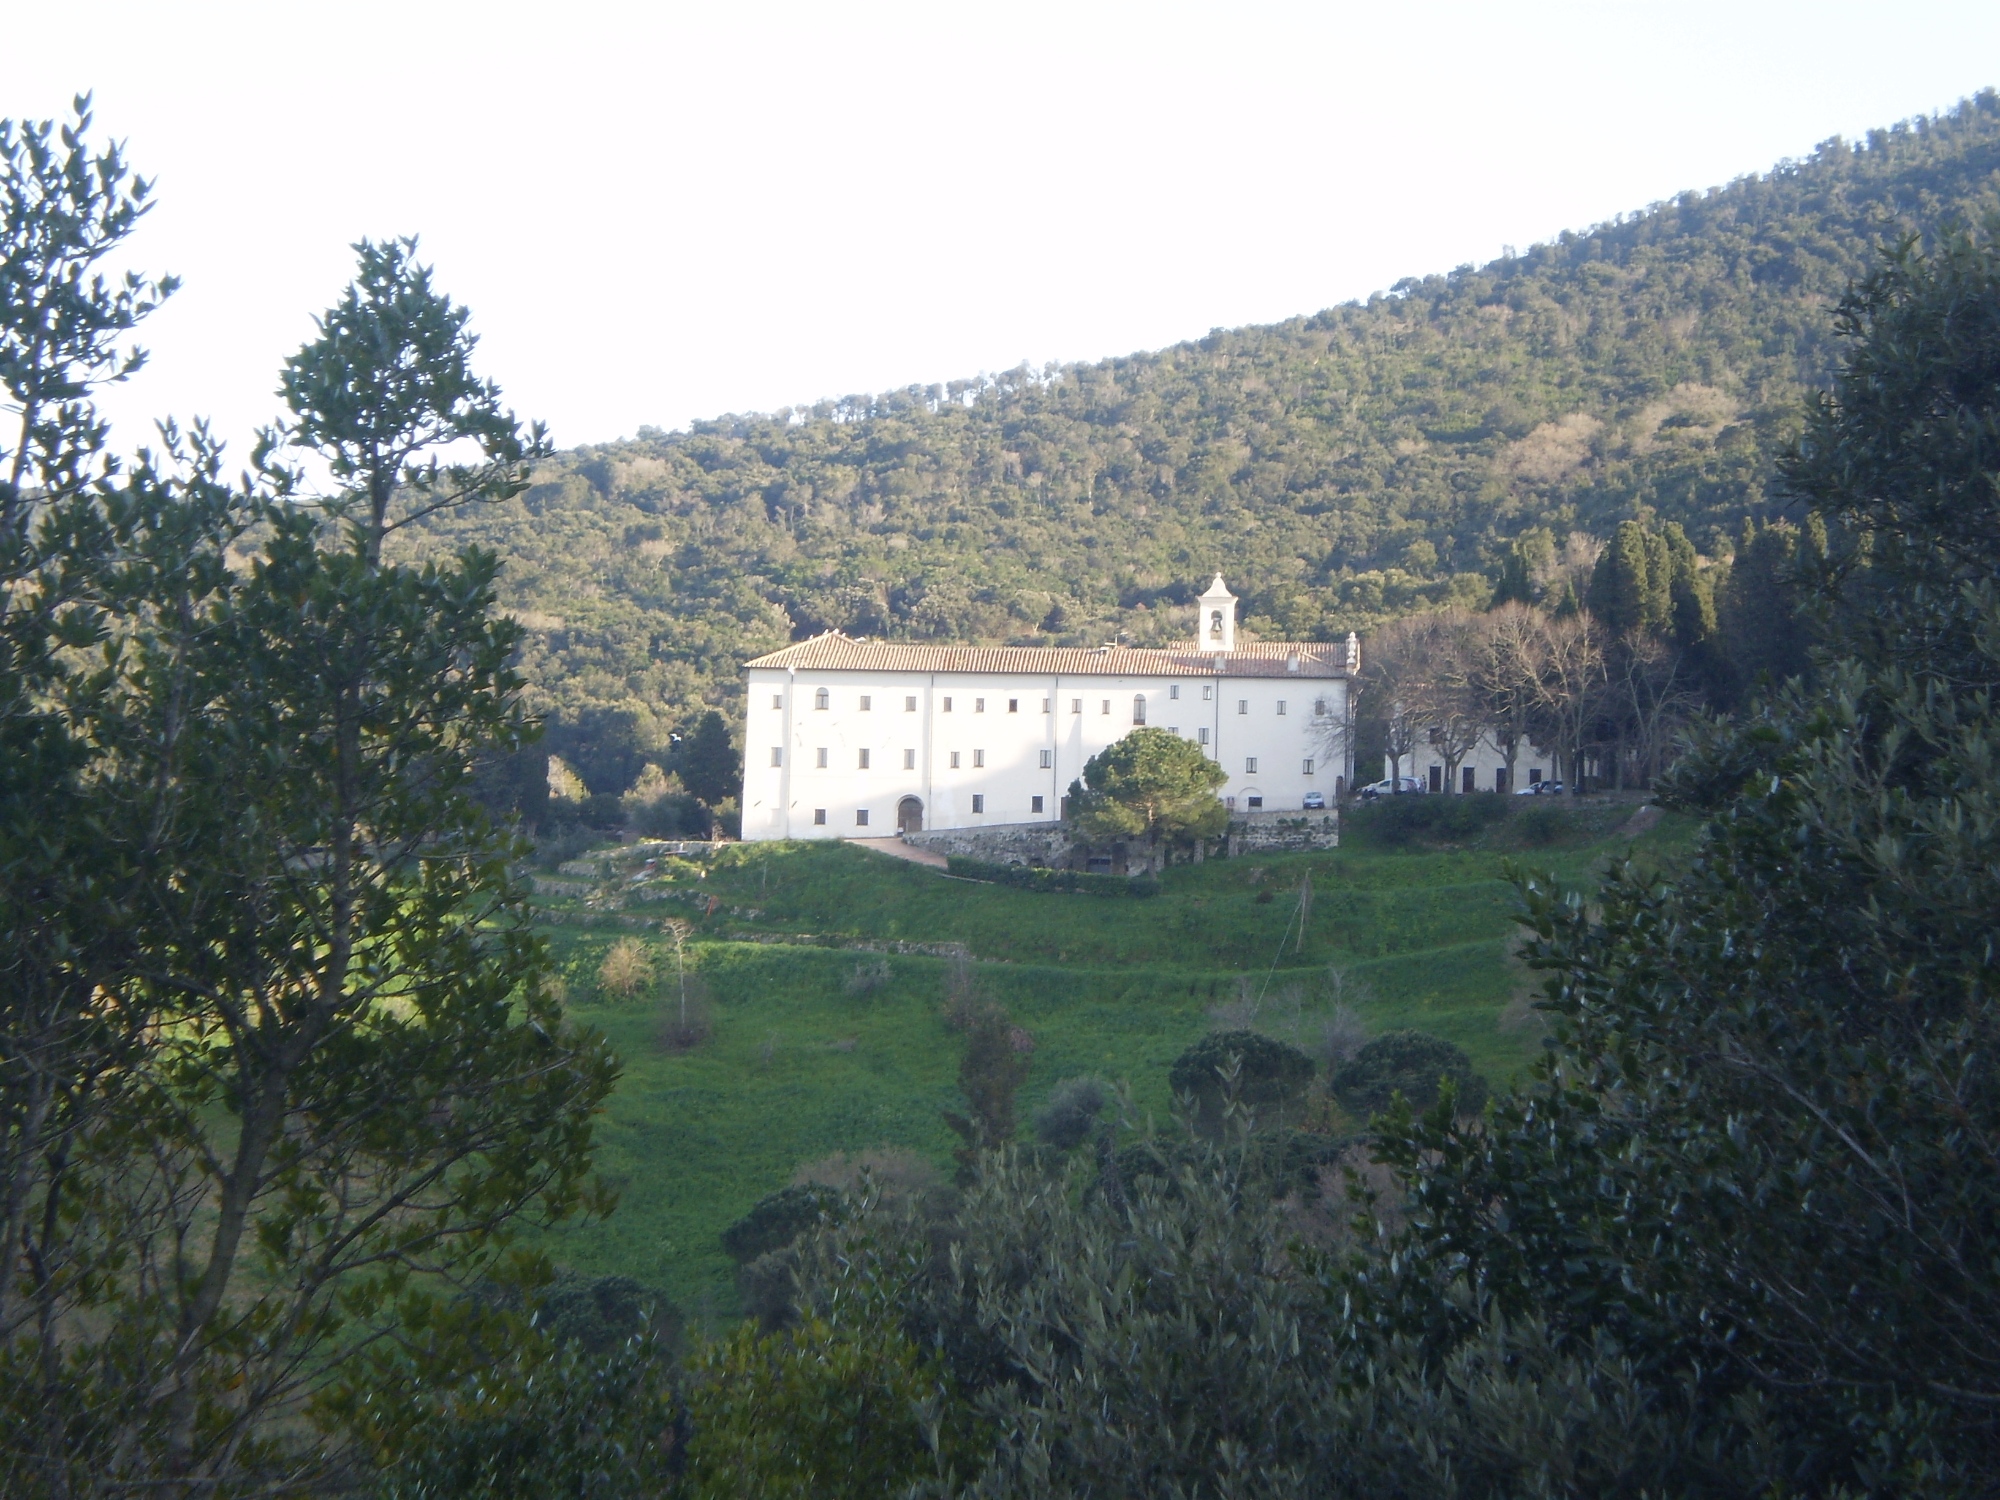 The convent immersed in the woods